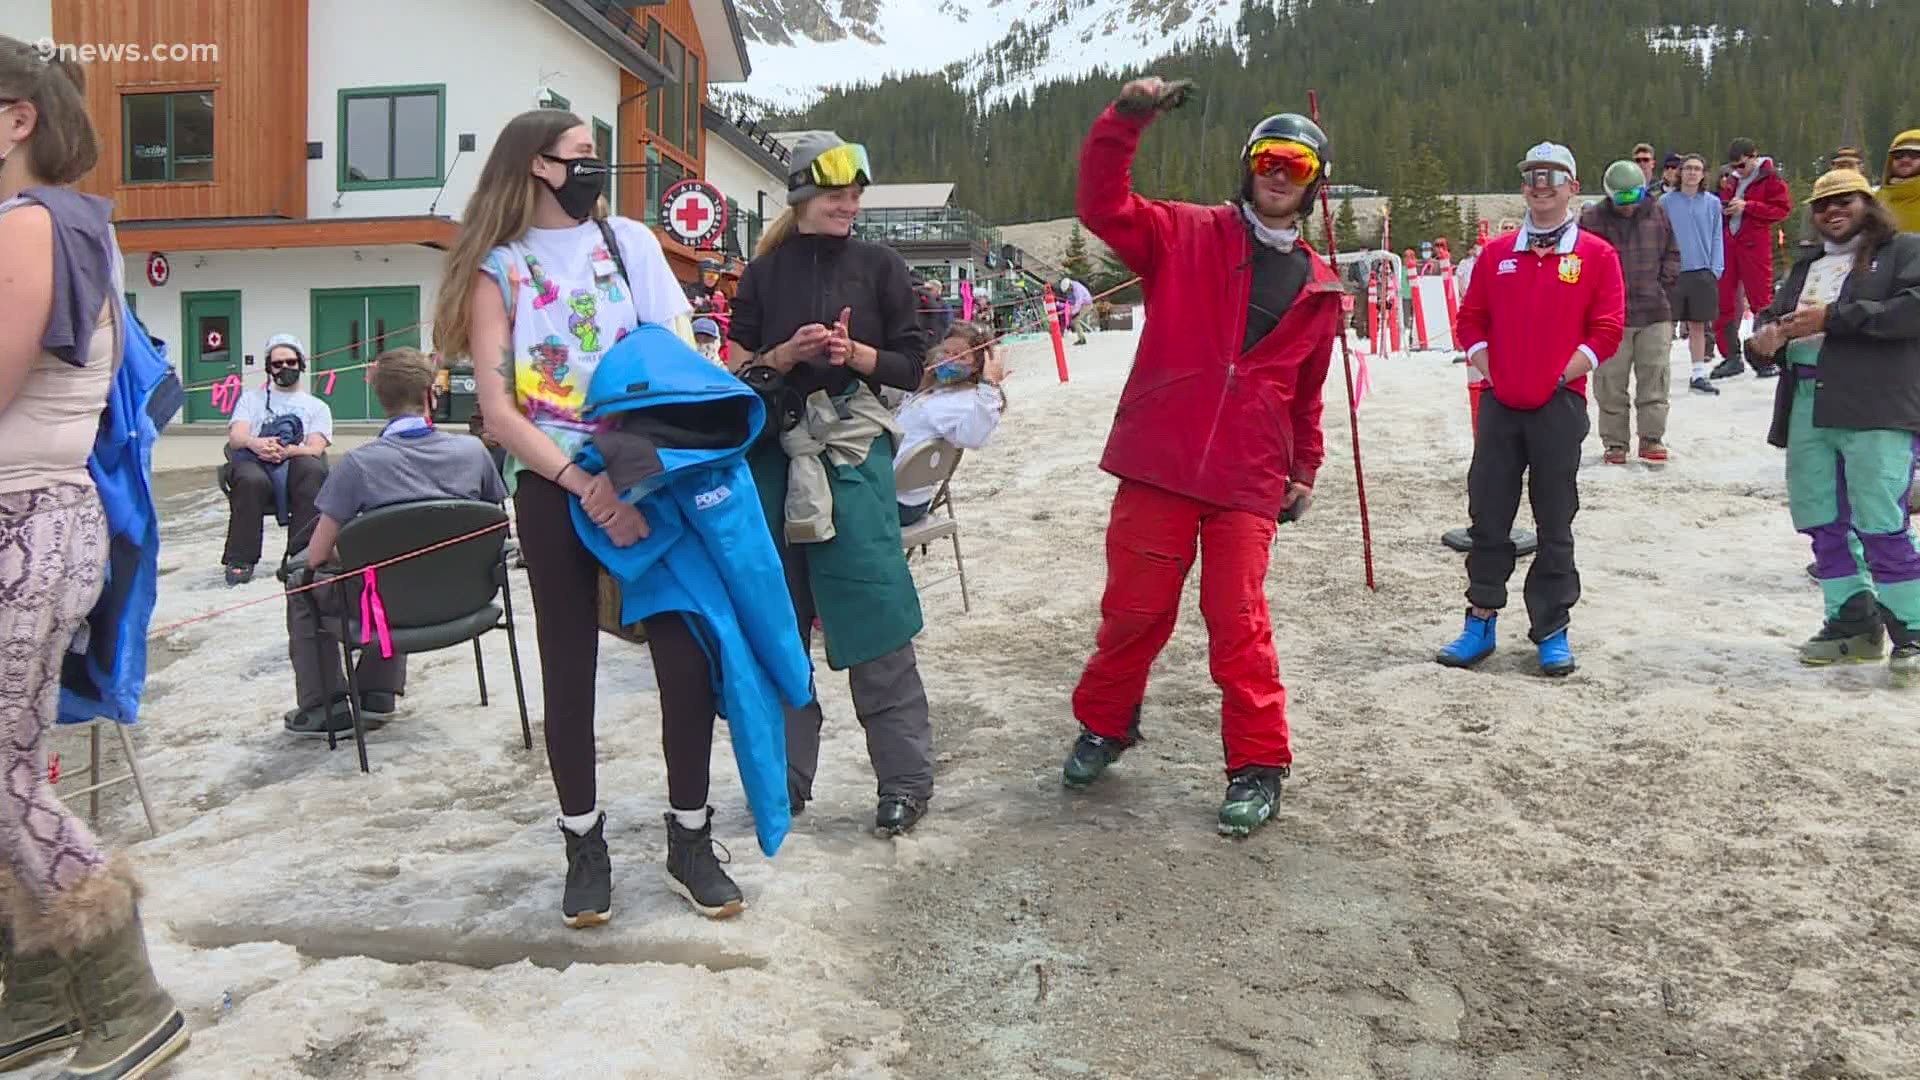 Summit County Public Health partnered with the ski area to give out 200 vaccine doses as skiers and snowboarders got to the lift on Sunday.